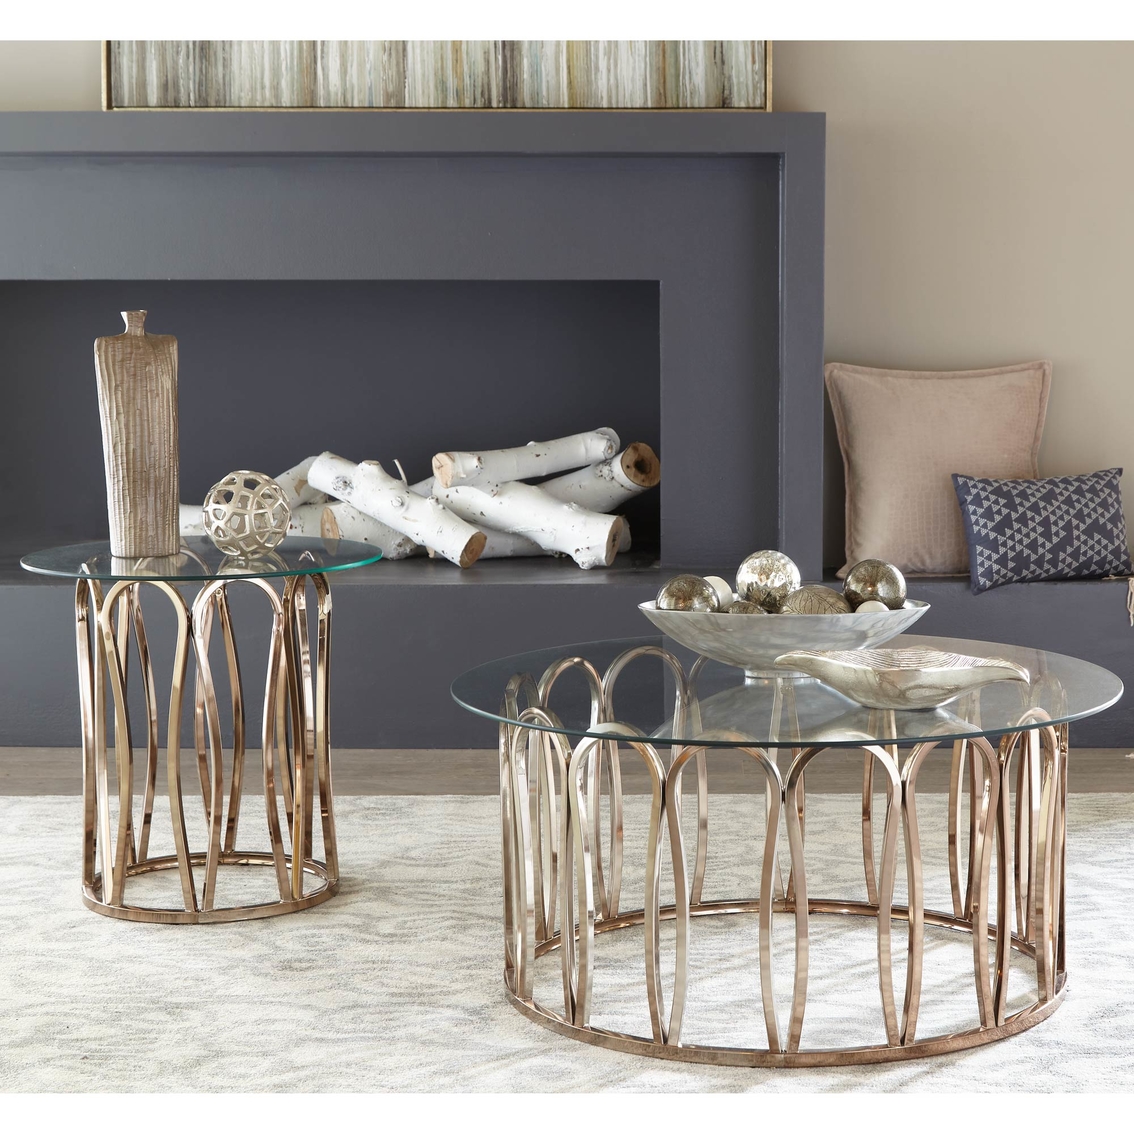 Coaster Modern Round Coffee Table with Metal Base - Image 2 of 2